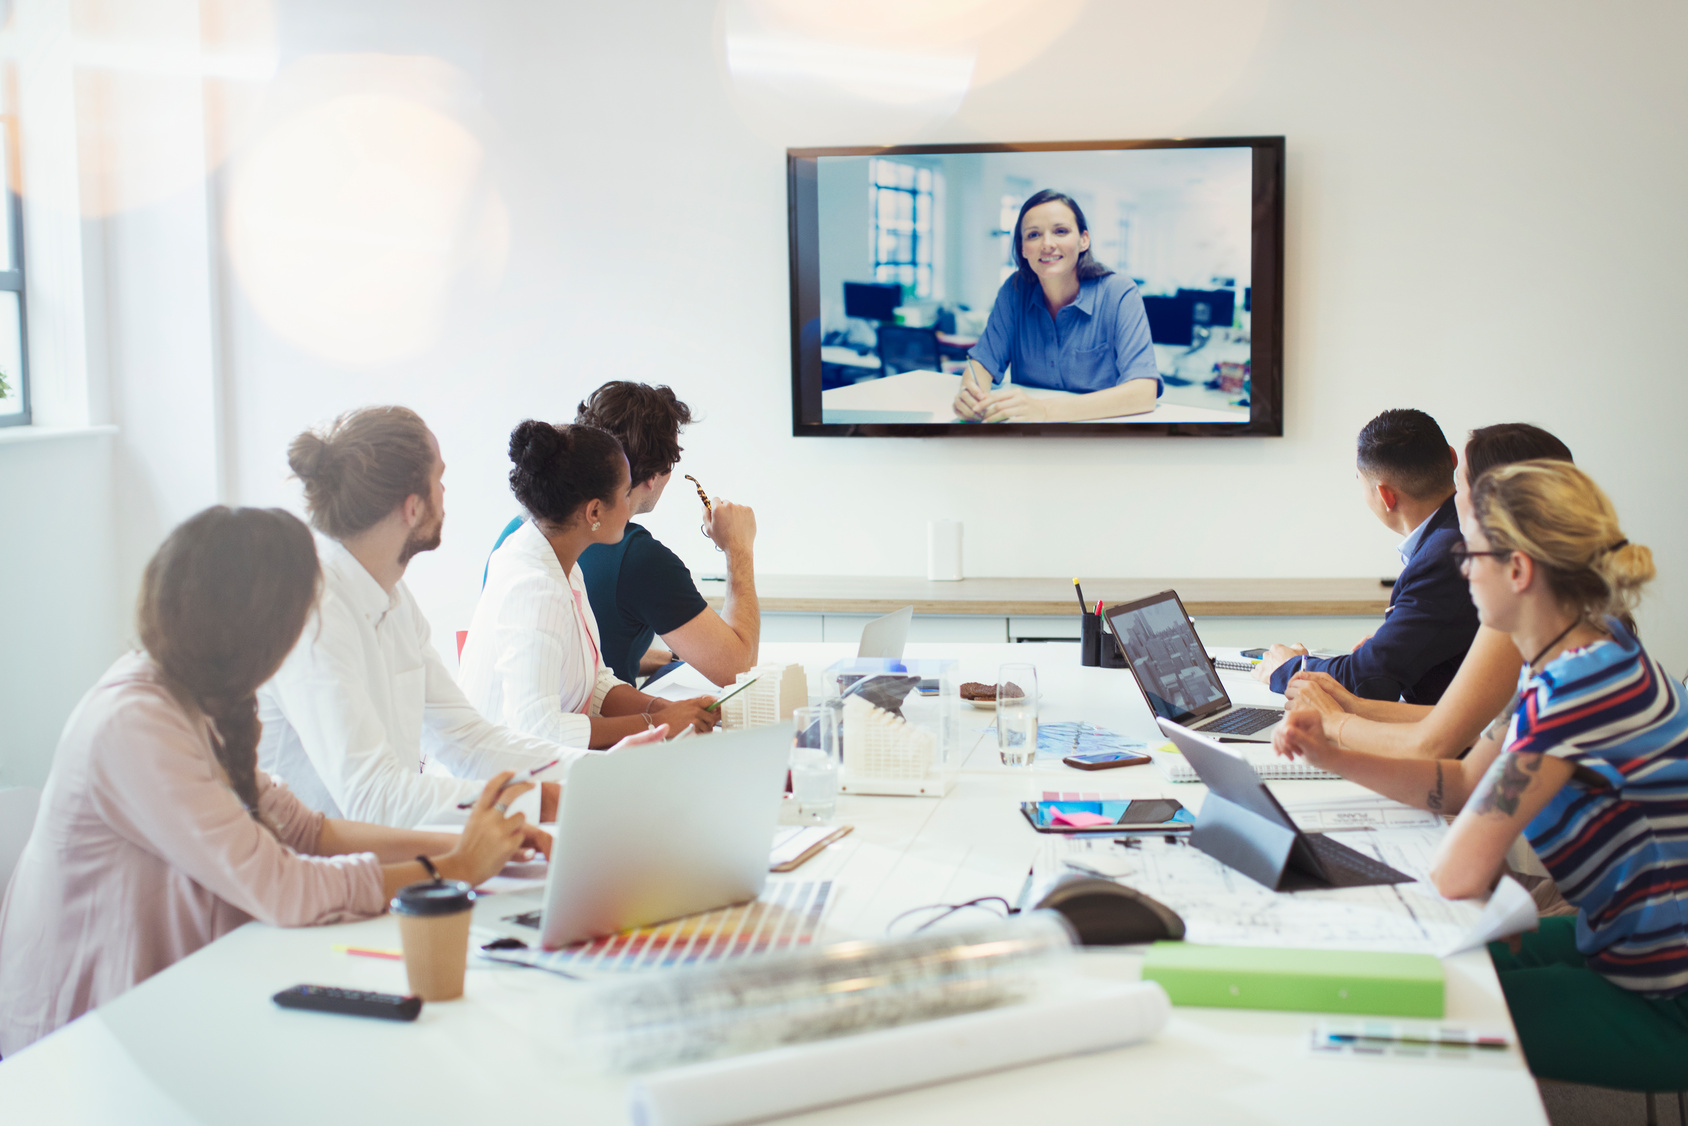 Lots of Video Calls? 5 Tips for Creating a Zoom Conference Room Setup